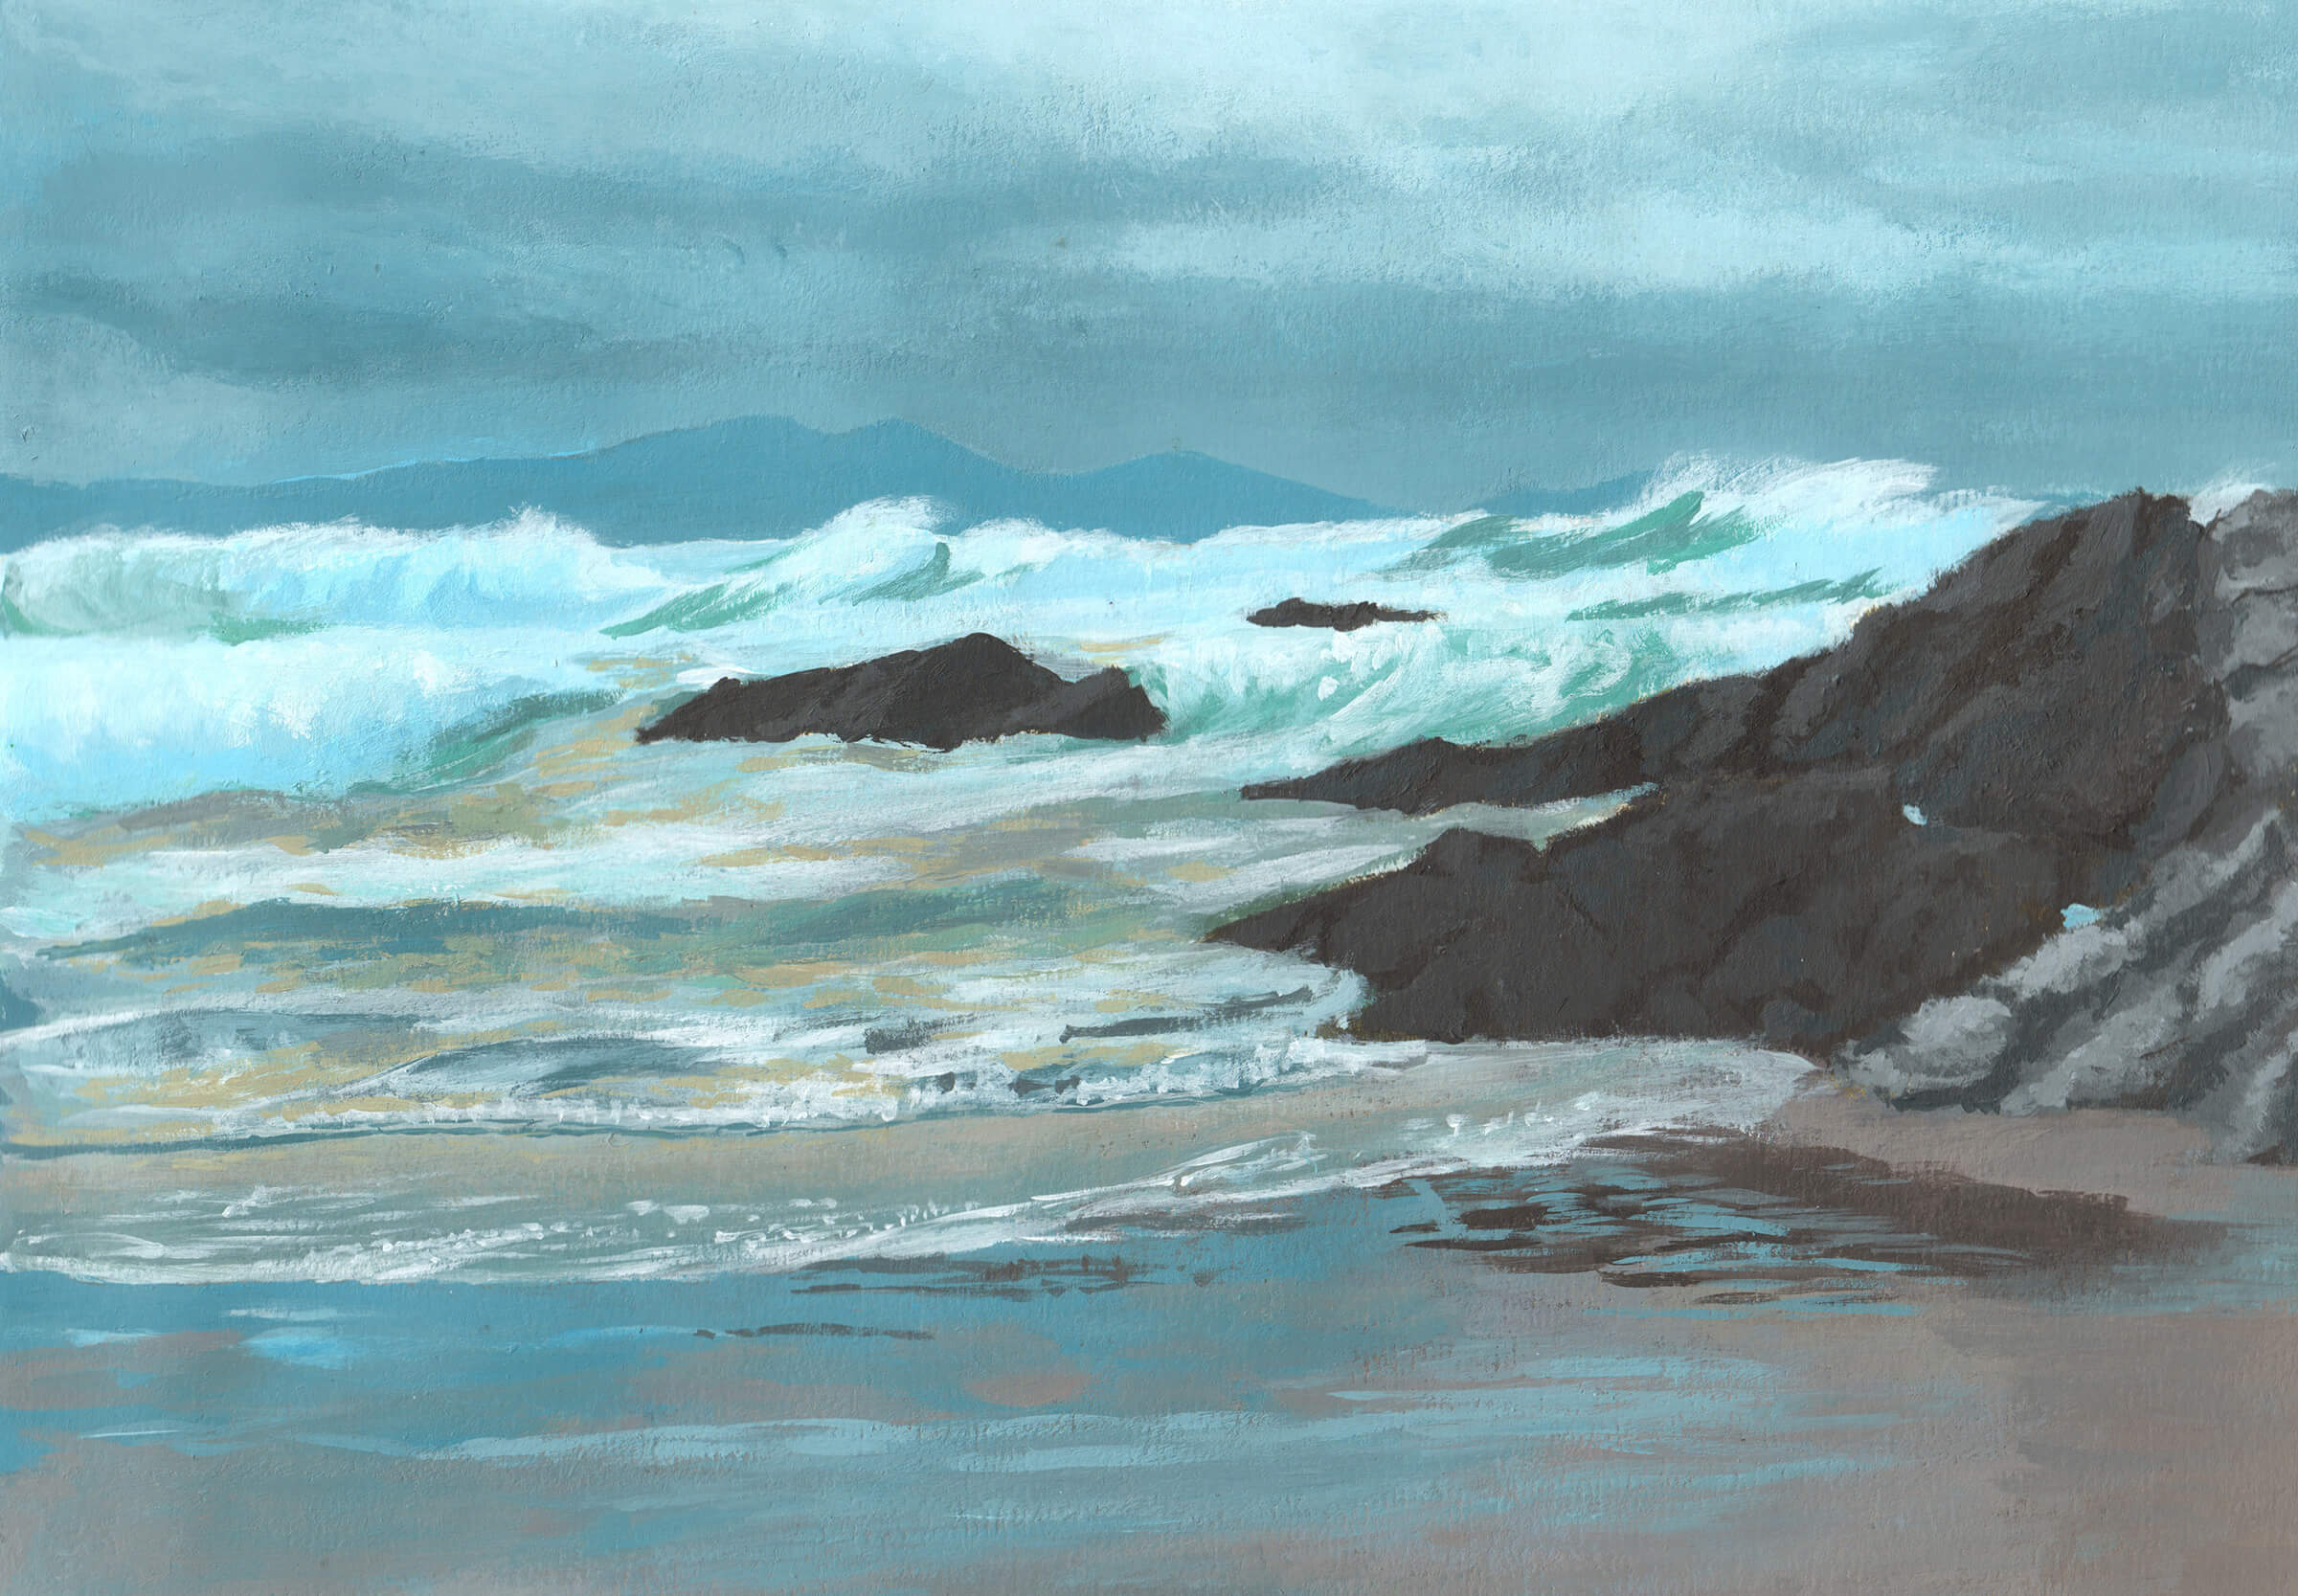 Landscape painting of an ocean shore with choppy white waves crashing against dark gray rocks against a dark cloudy sky.